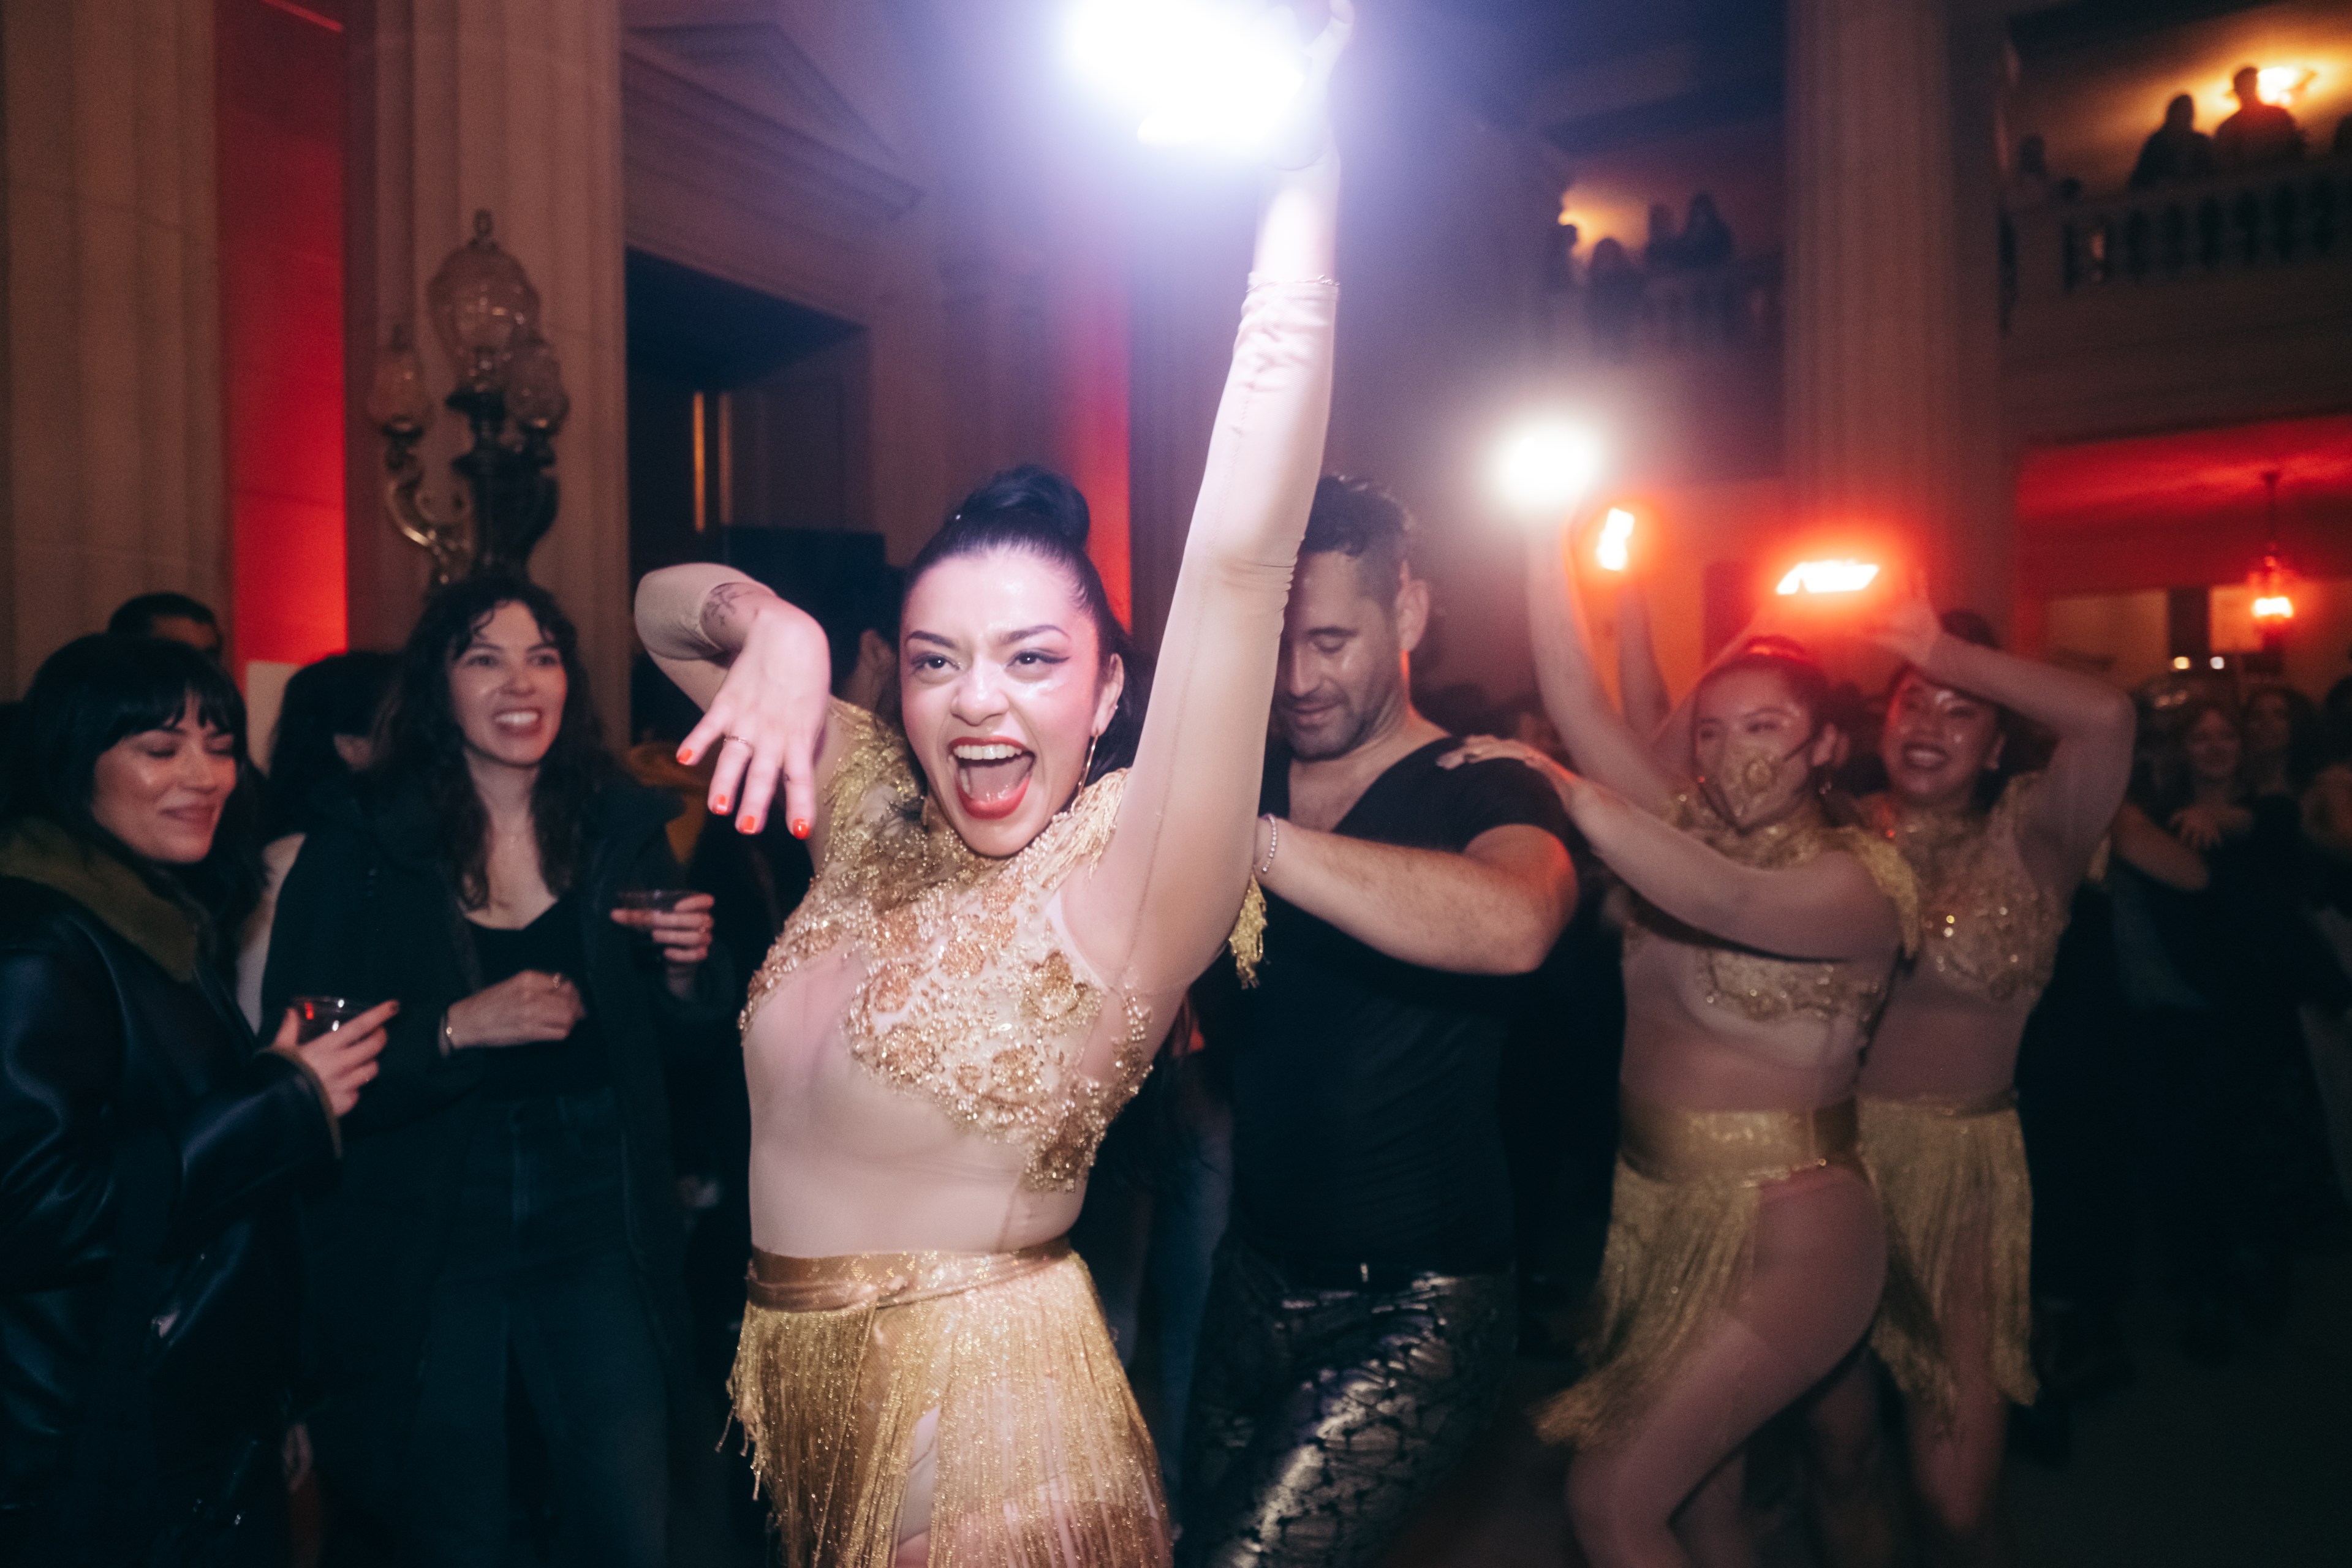 A joyous woman dances in a golden outfit at a lively party, with onlookers smiling and others dancing behind her.